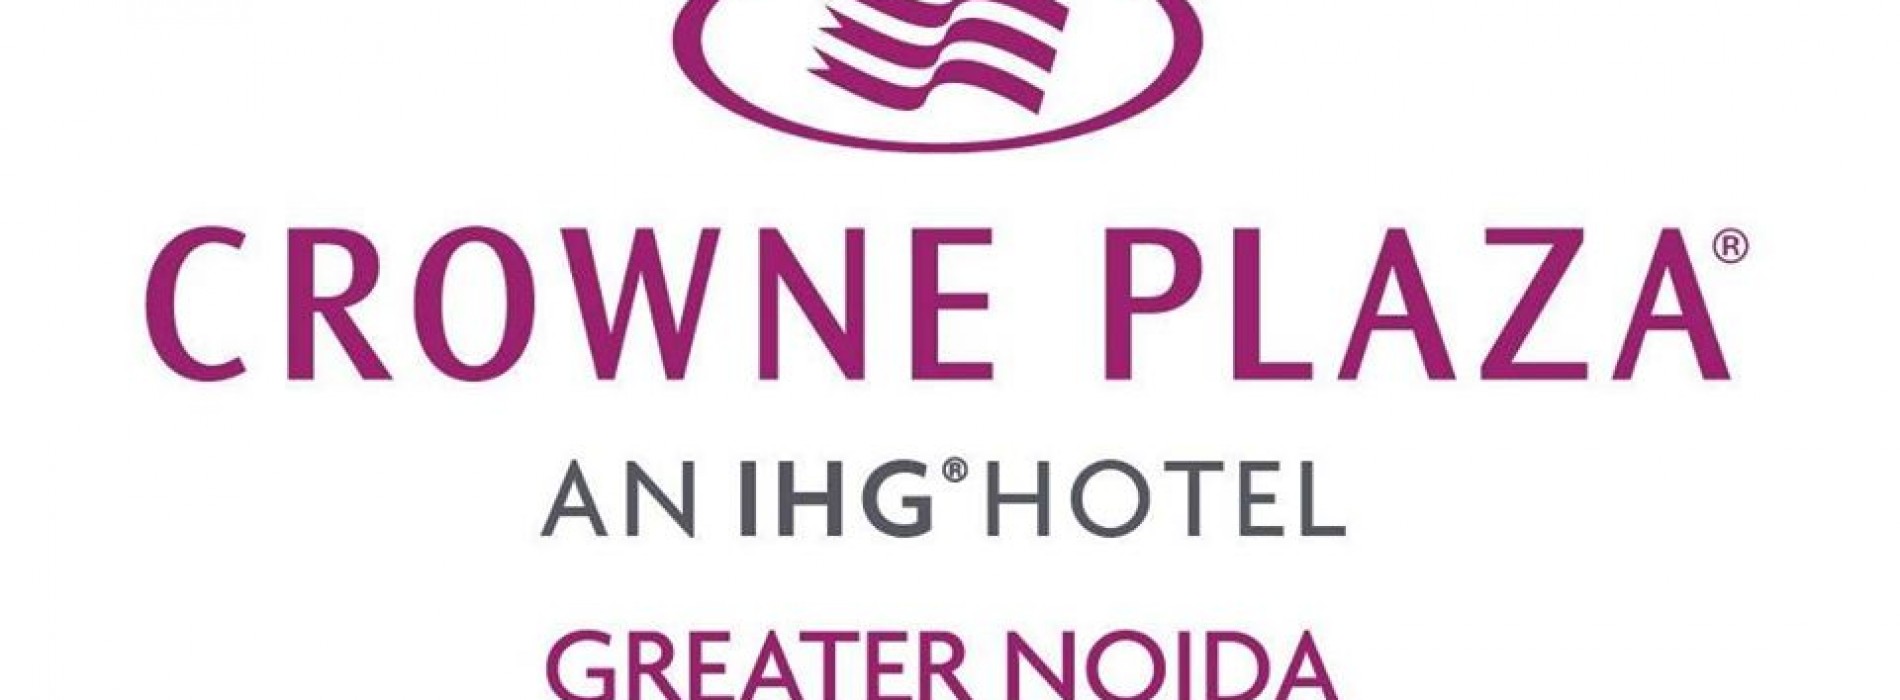 Crowne Plaza Greater Noida launches food home delivery service